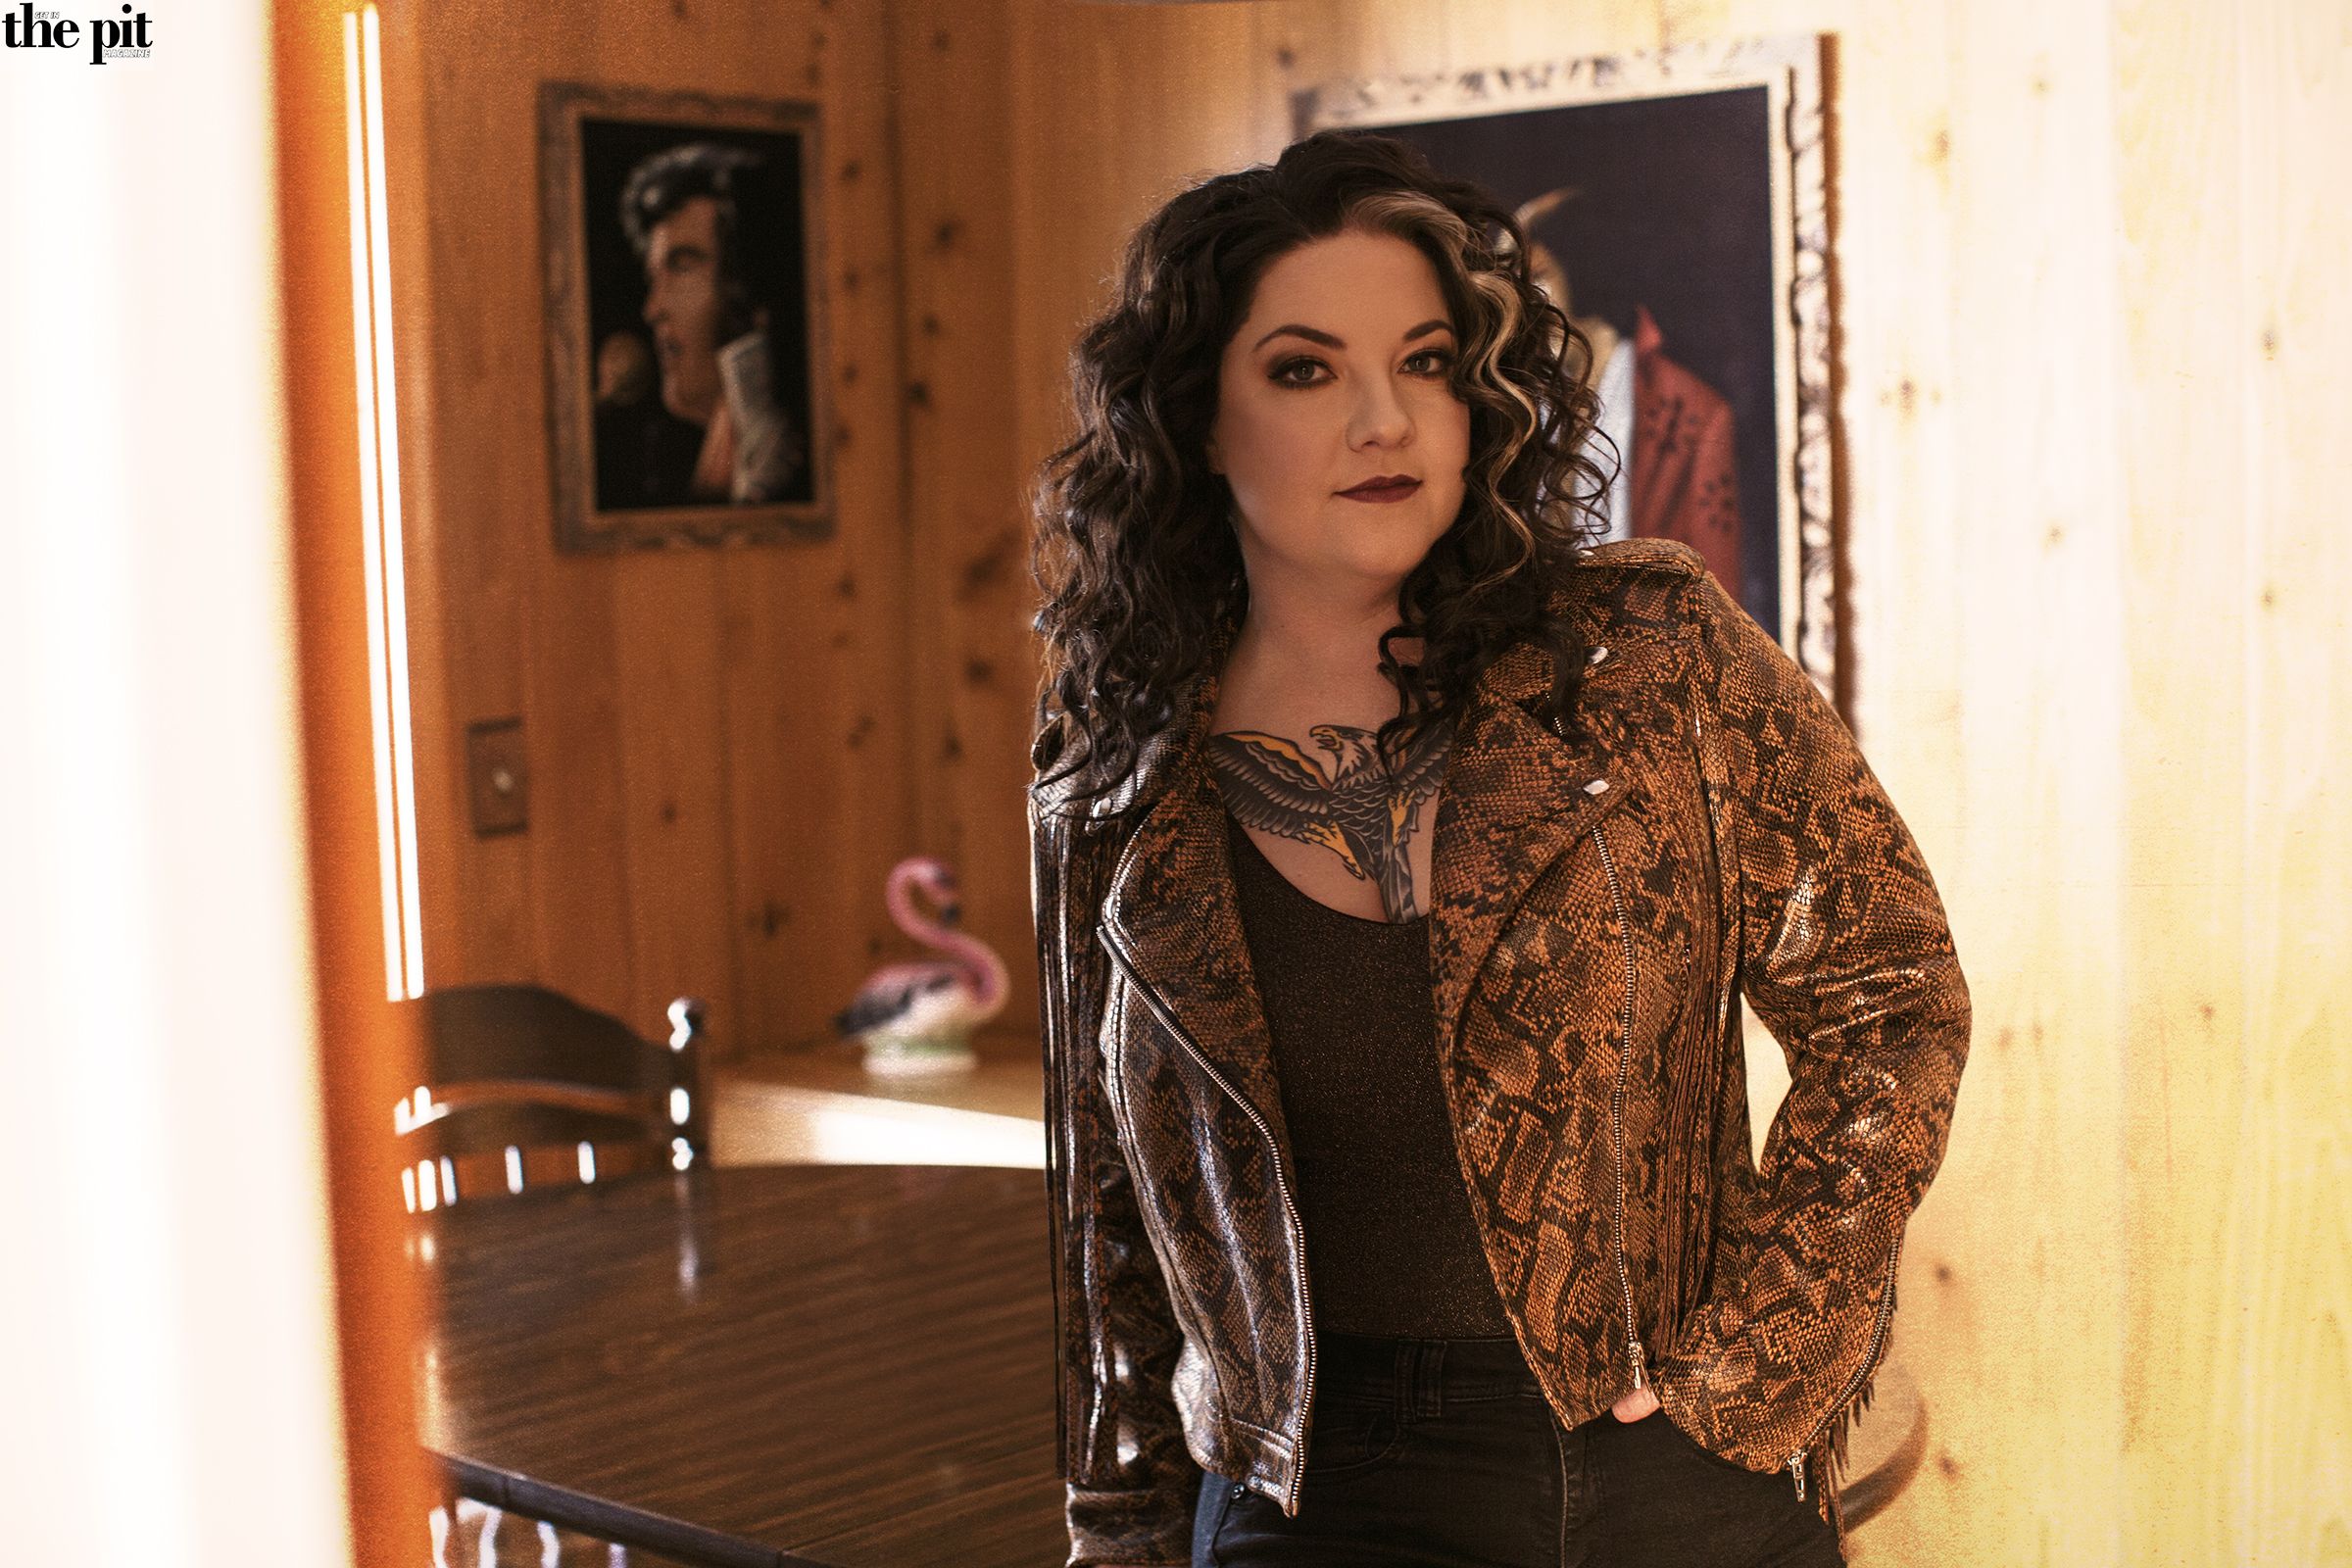 Ashley McBryde Announces New EP "Never Will Live From A Distance